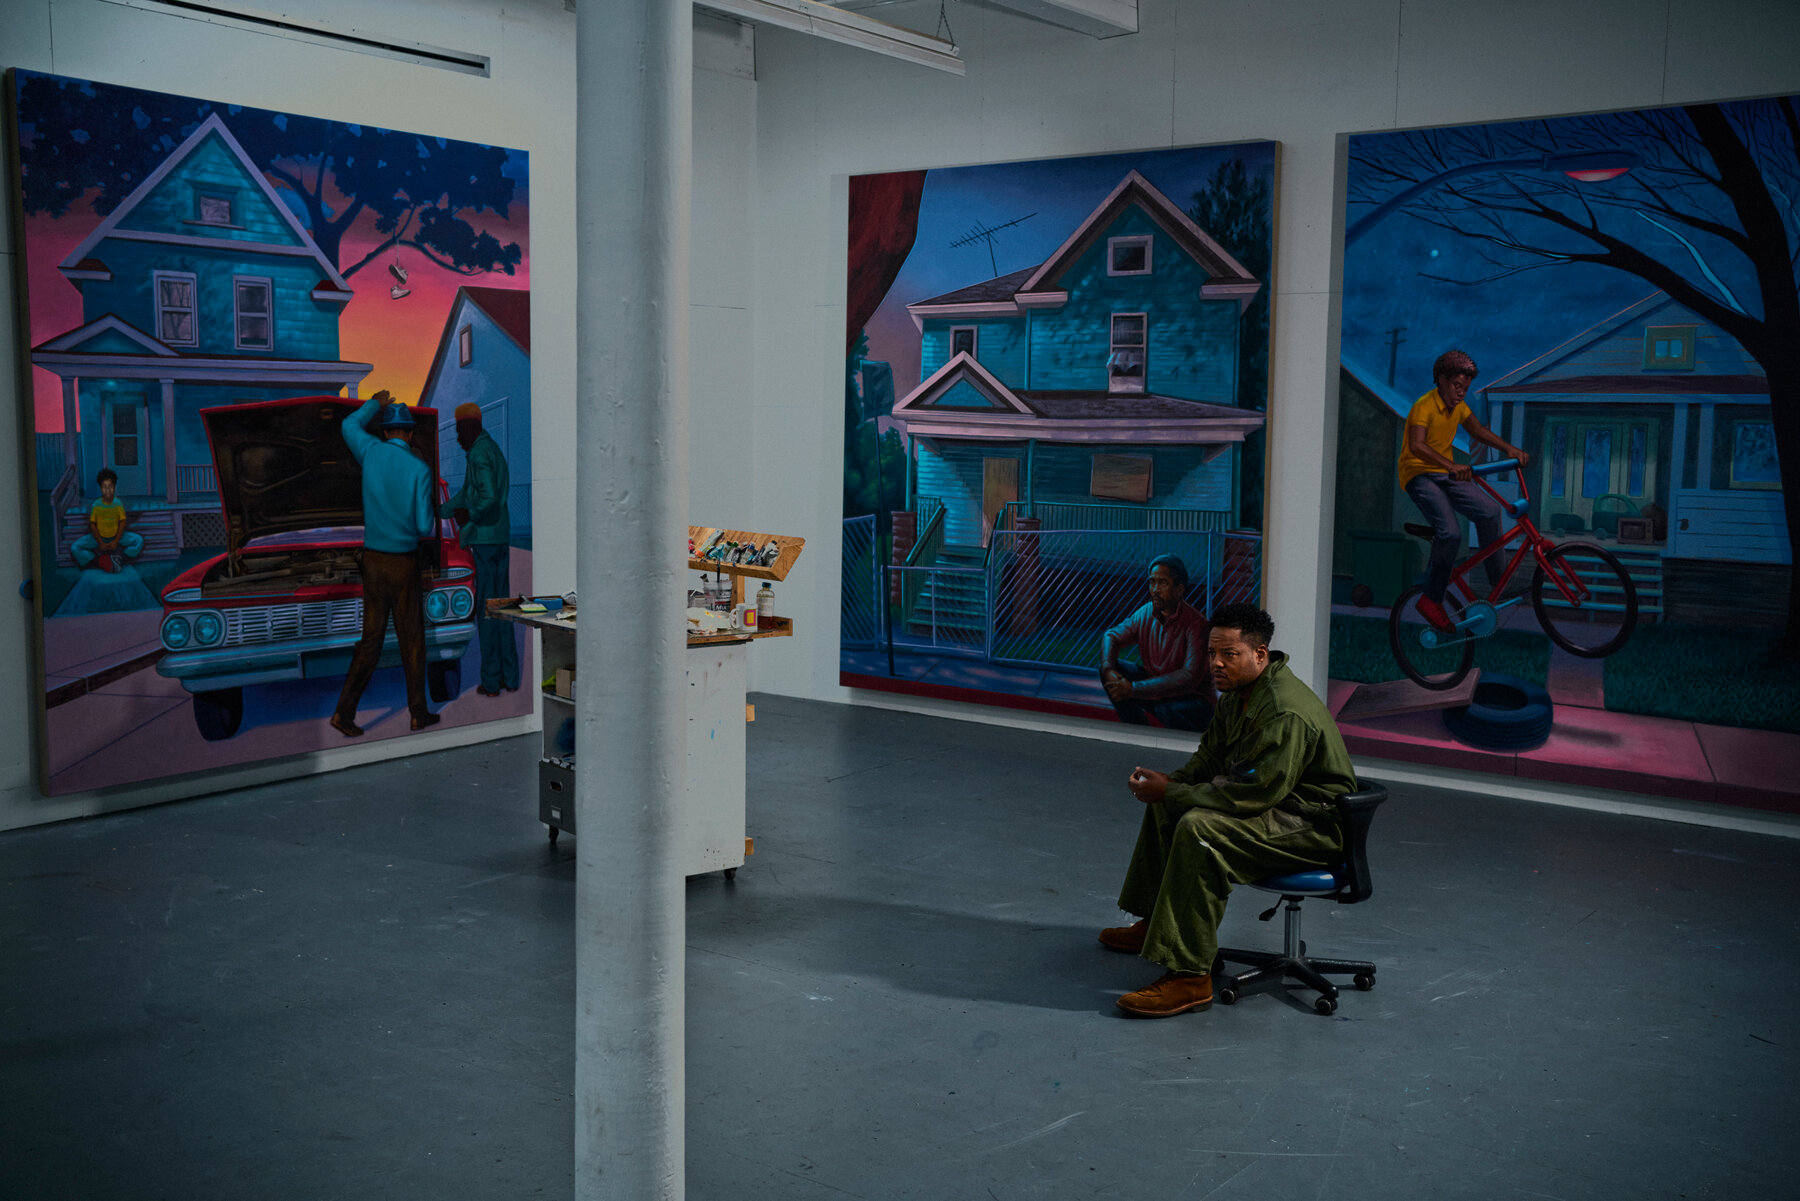 Titus Kaphar sits on an office chair in a gallery space with three large paintings of the exteriors of houses hanging on the walls.